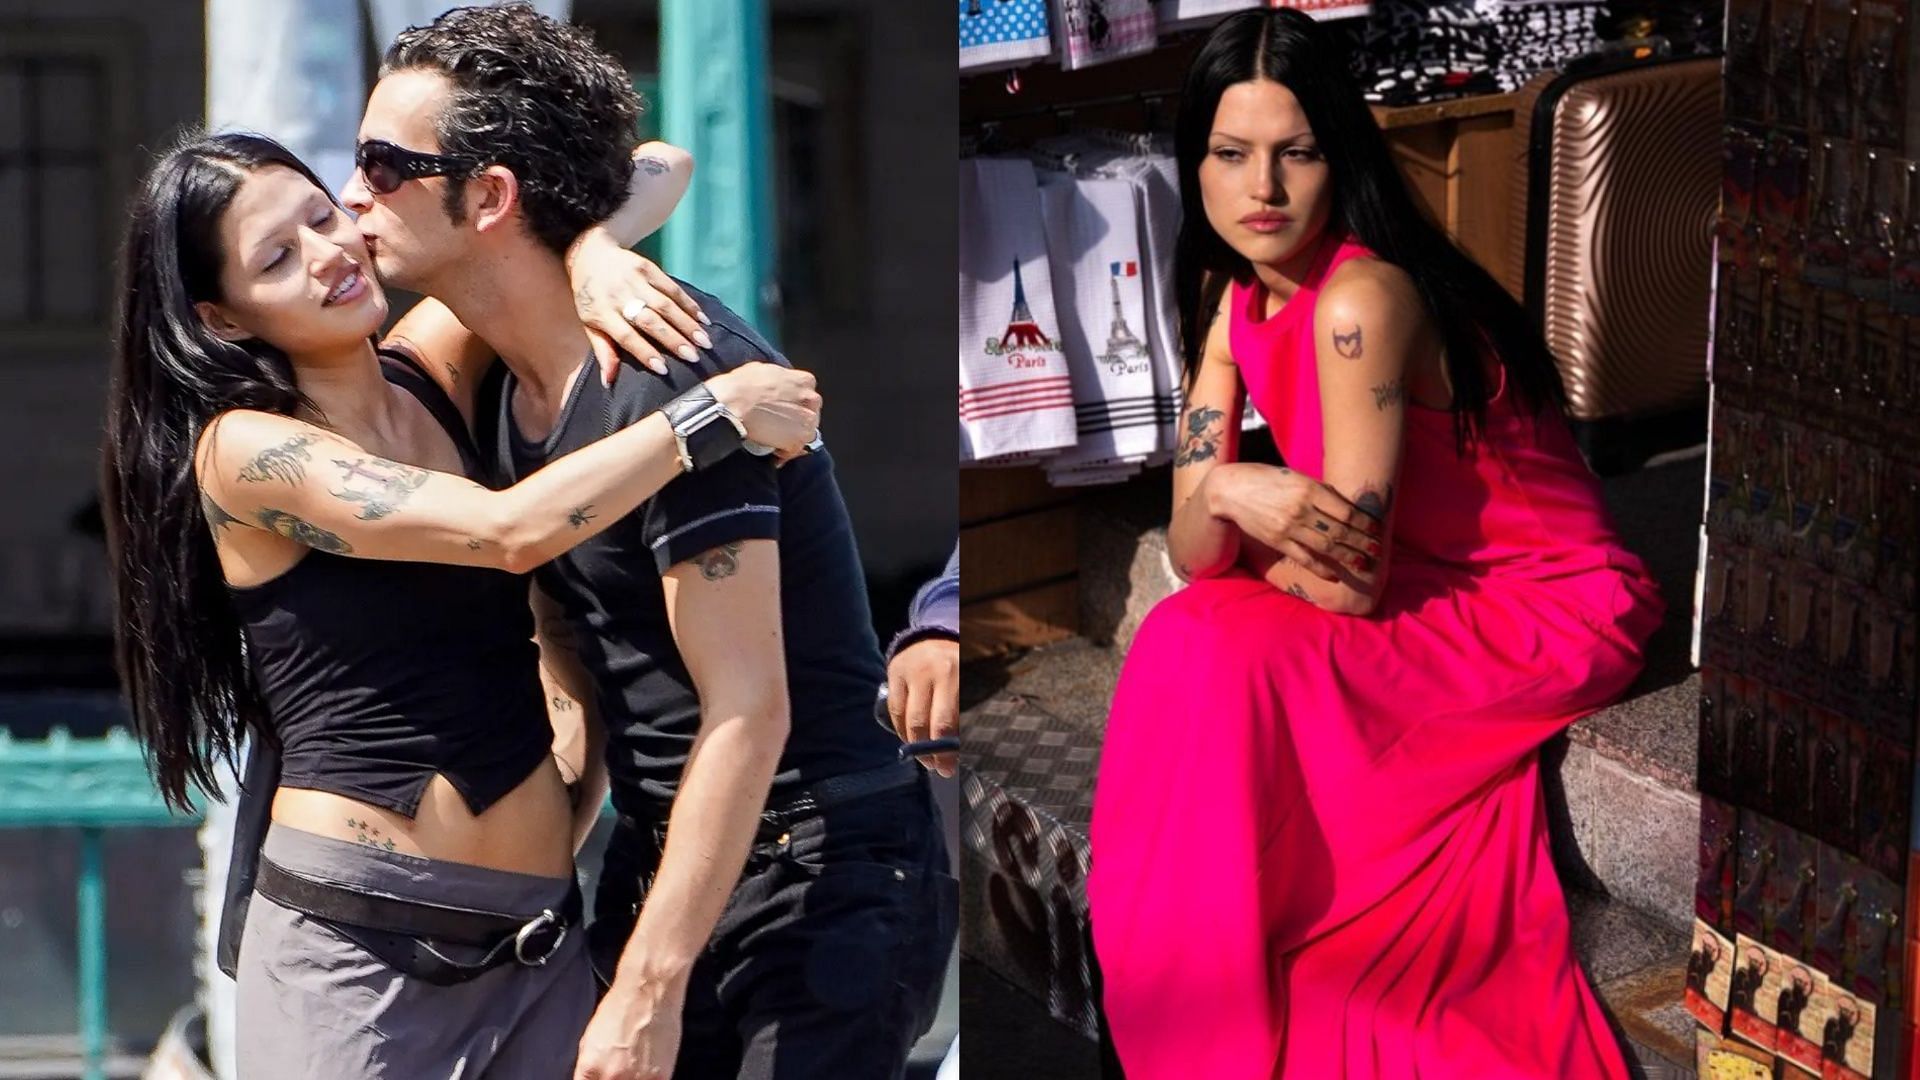 Rising singer and model Gabbriette sparked romance speculations with Matty Healy after being spotted in NYC together. (Image via TheImageDirect.com, Instagram/@gabbriette)